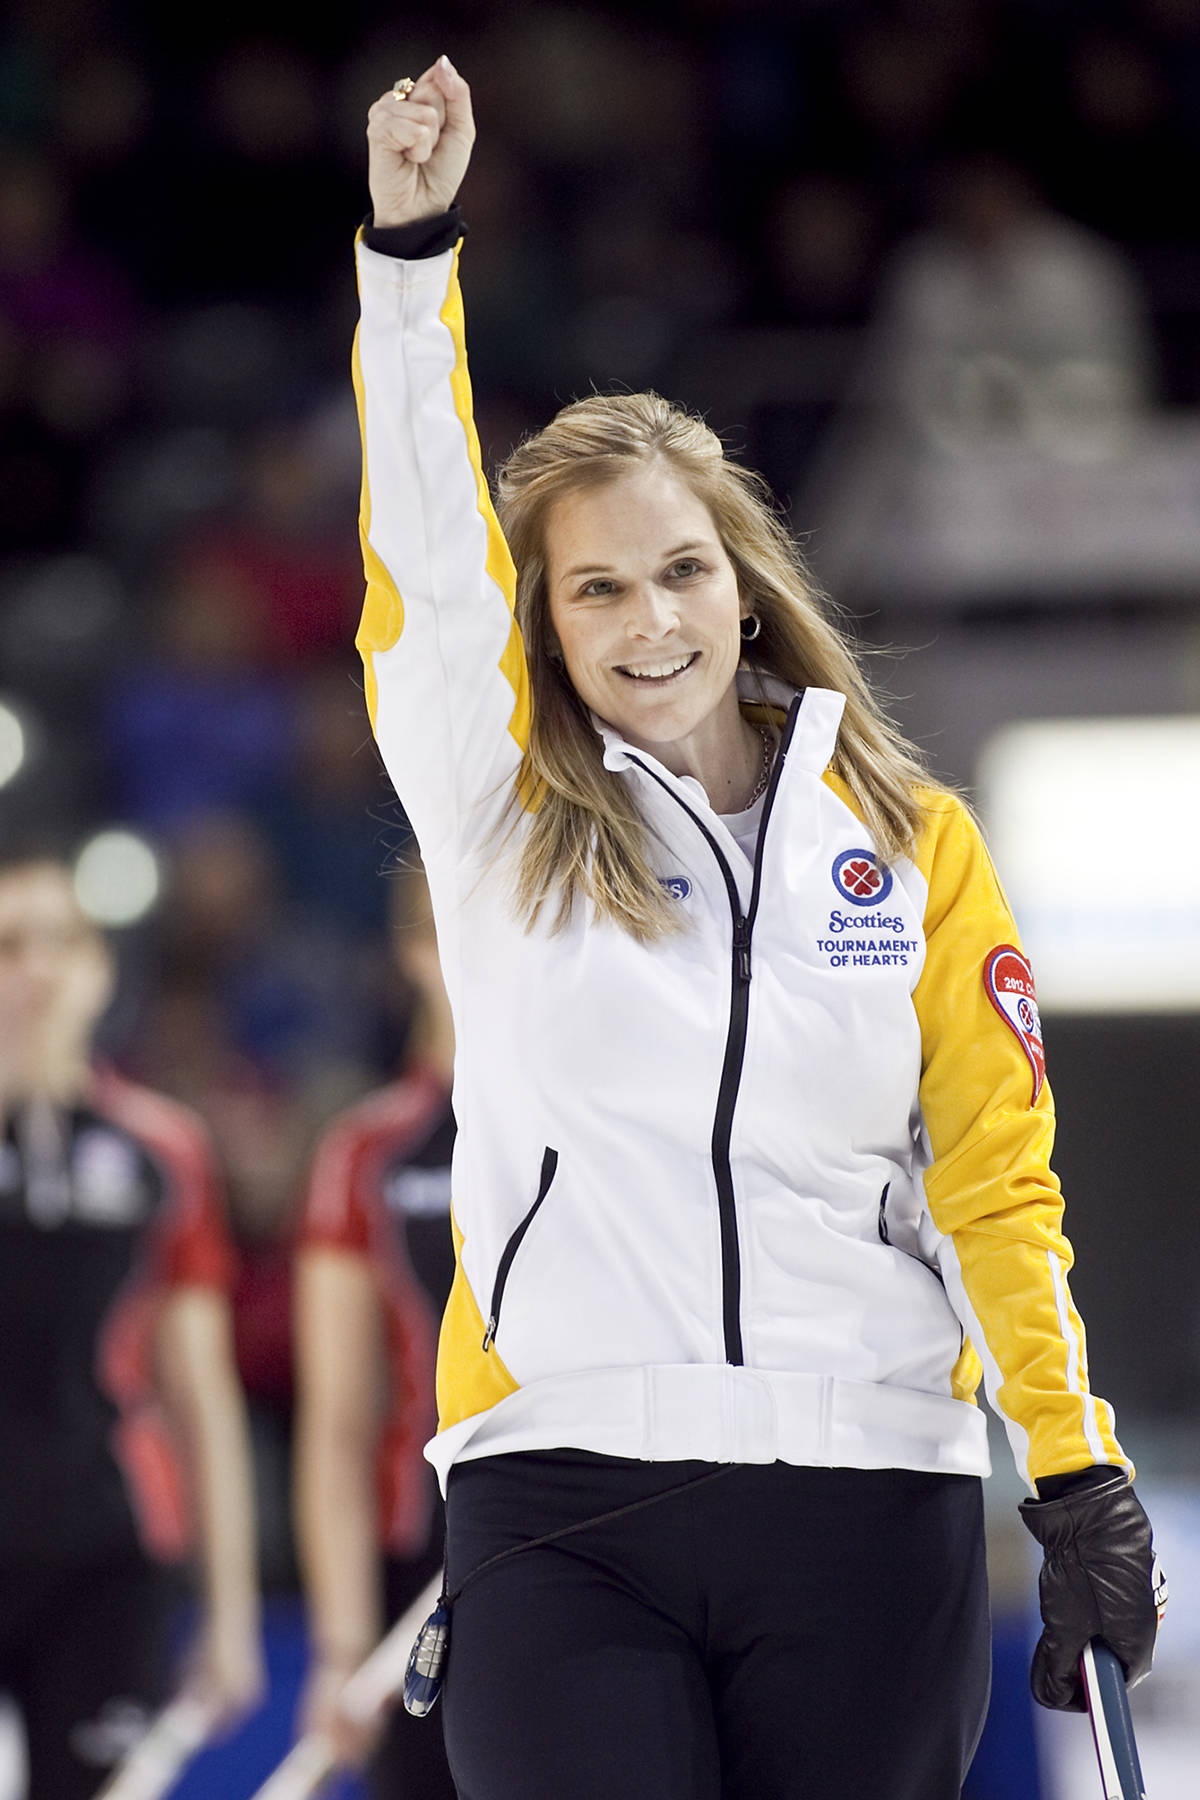 Scotties Tournament of Hearts ups the excitement with new elements